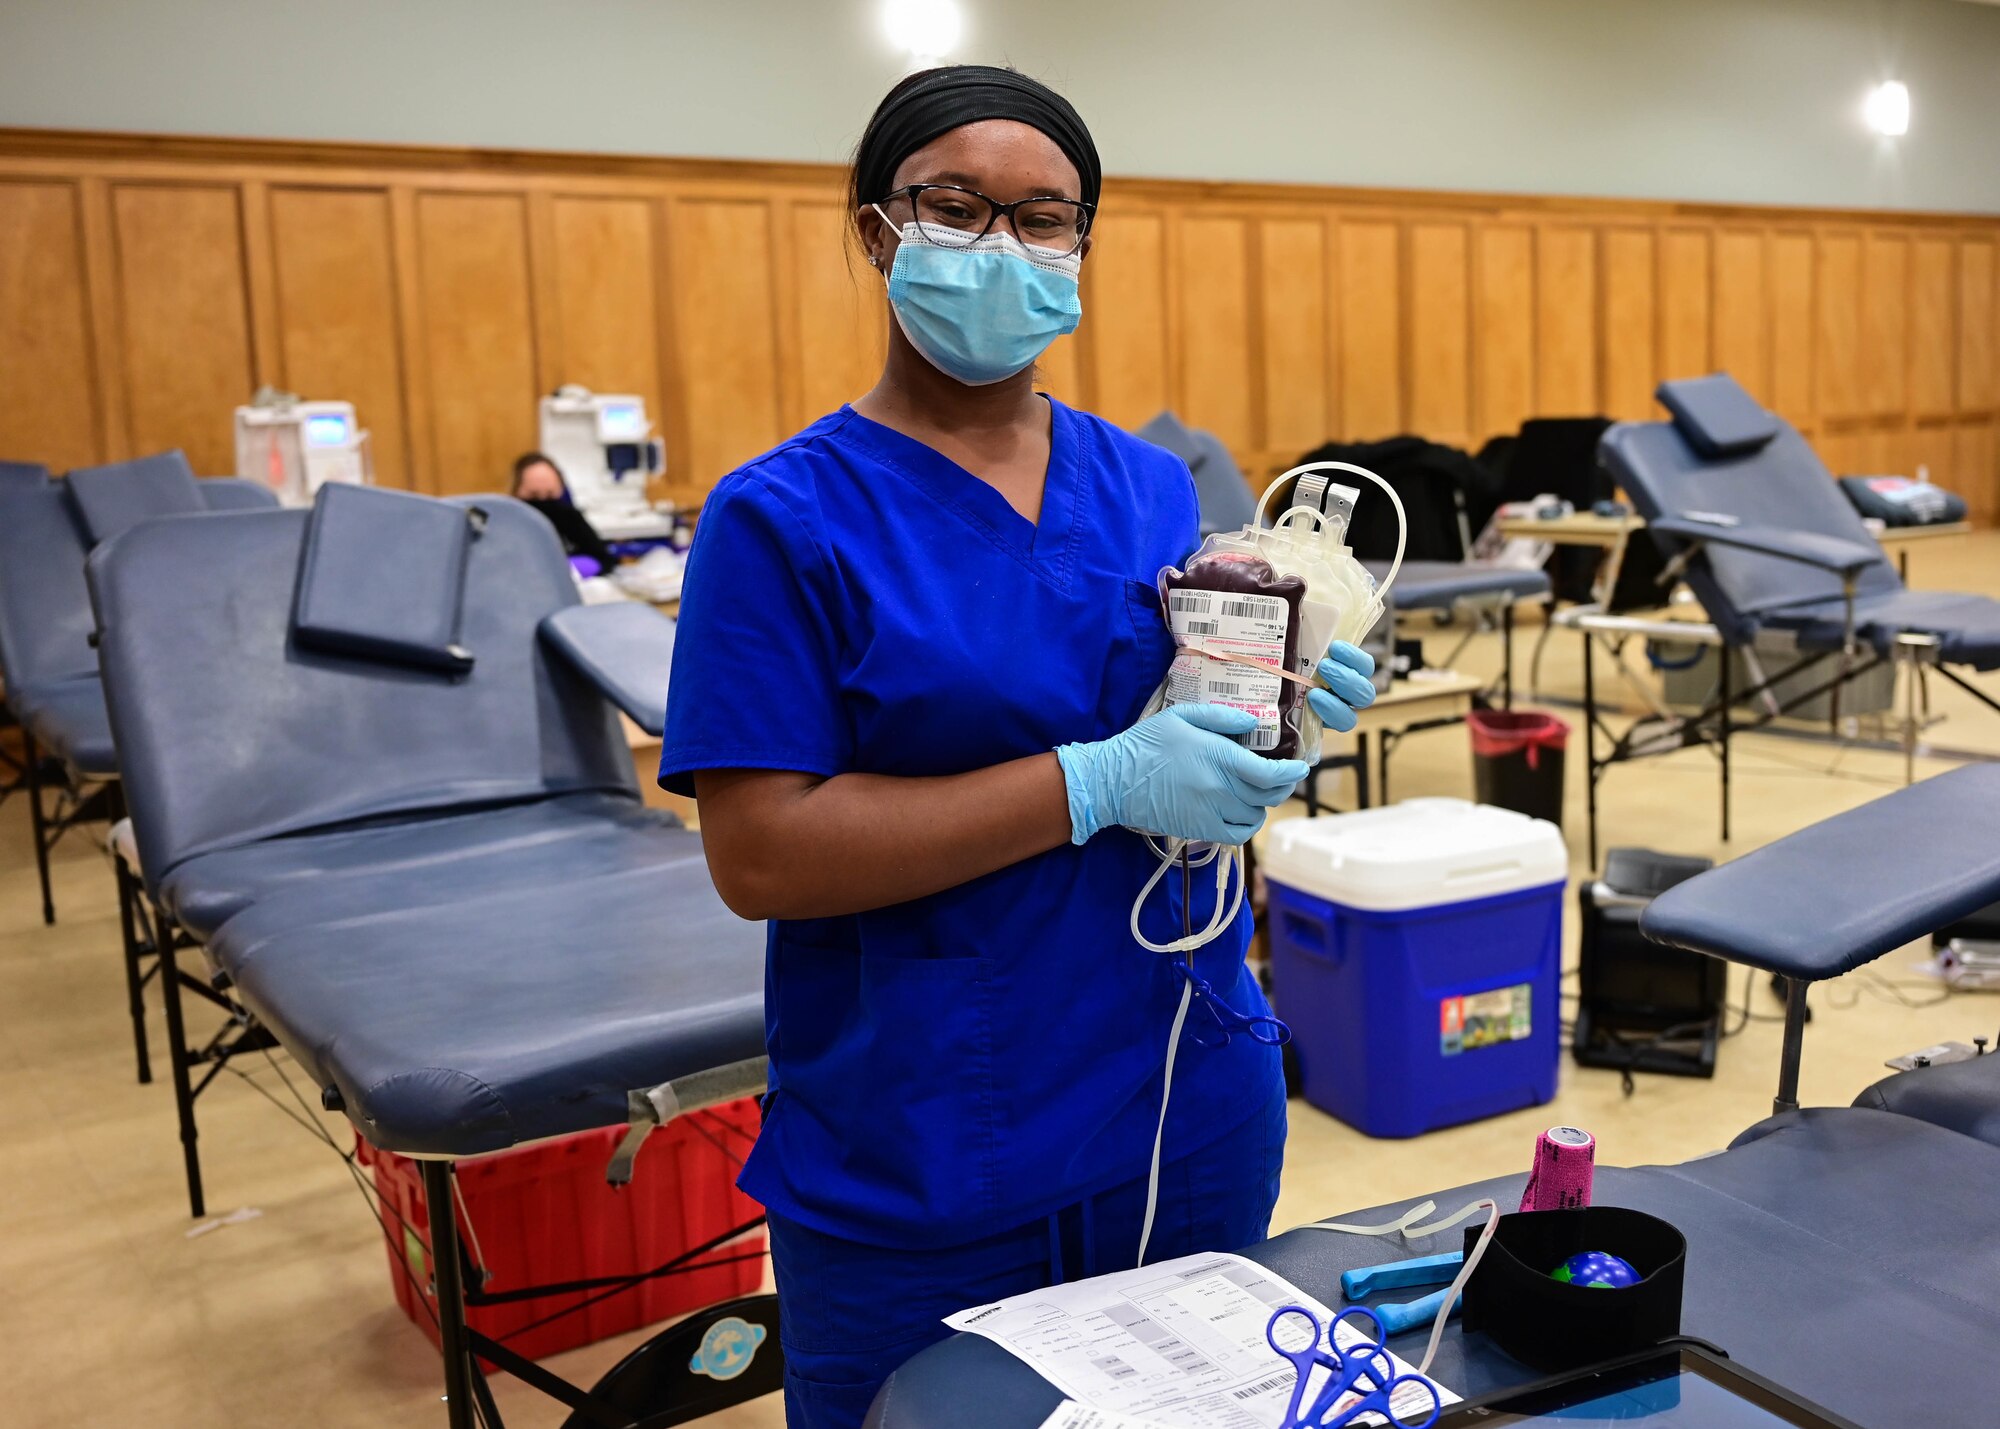 A phlebotomist from the Arkansas Blood Institutes poses for a photo during a blood drive